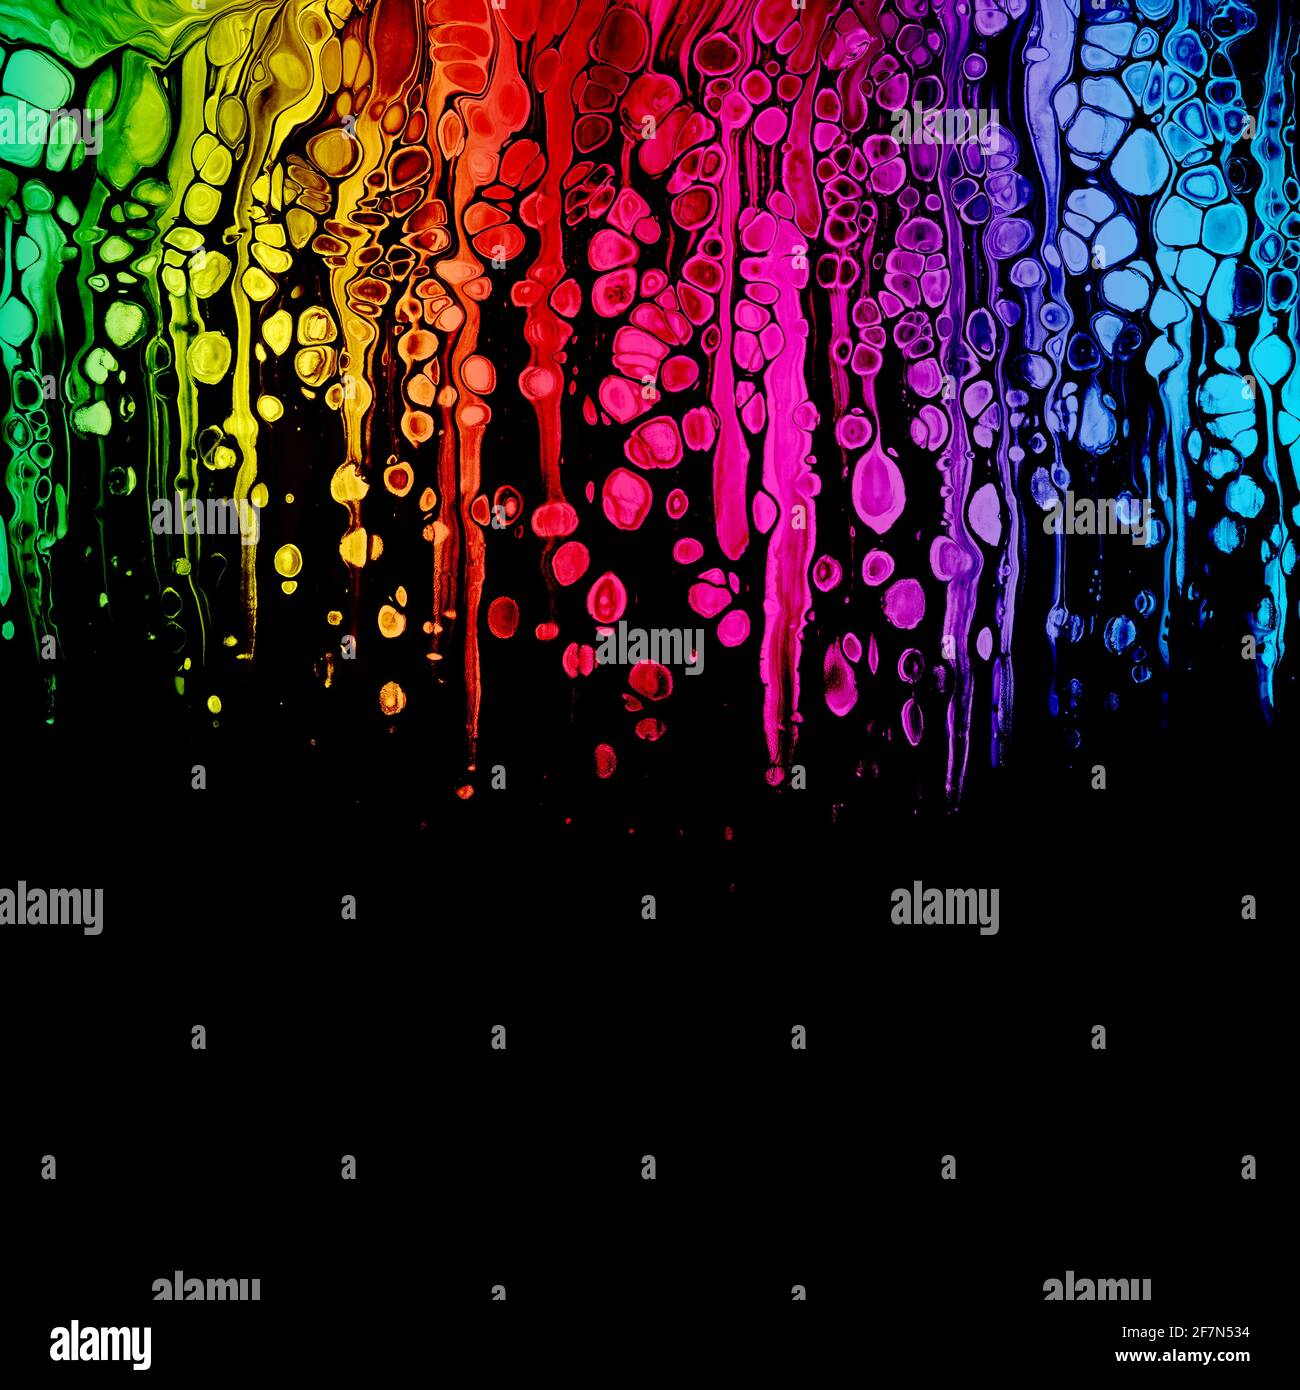 Colorful abstract acrylic dripping painting. Free flowing cells. Pouring. Stock Photo